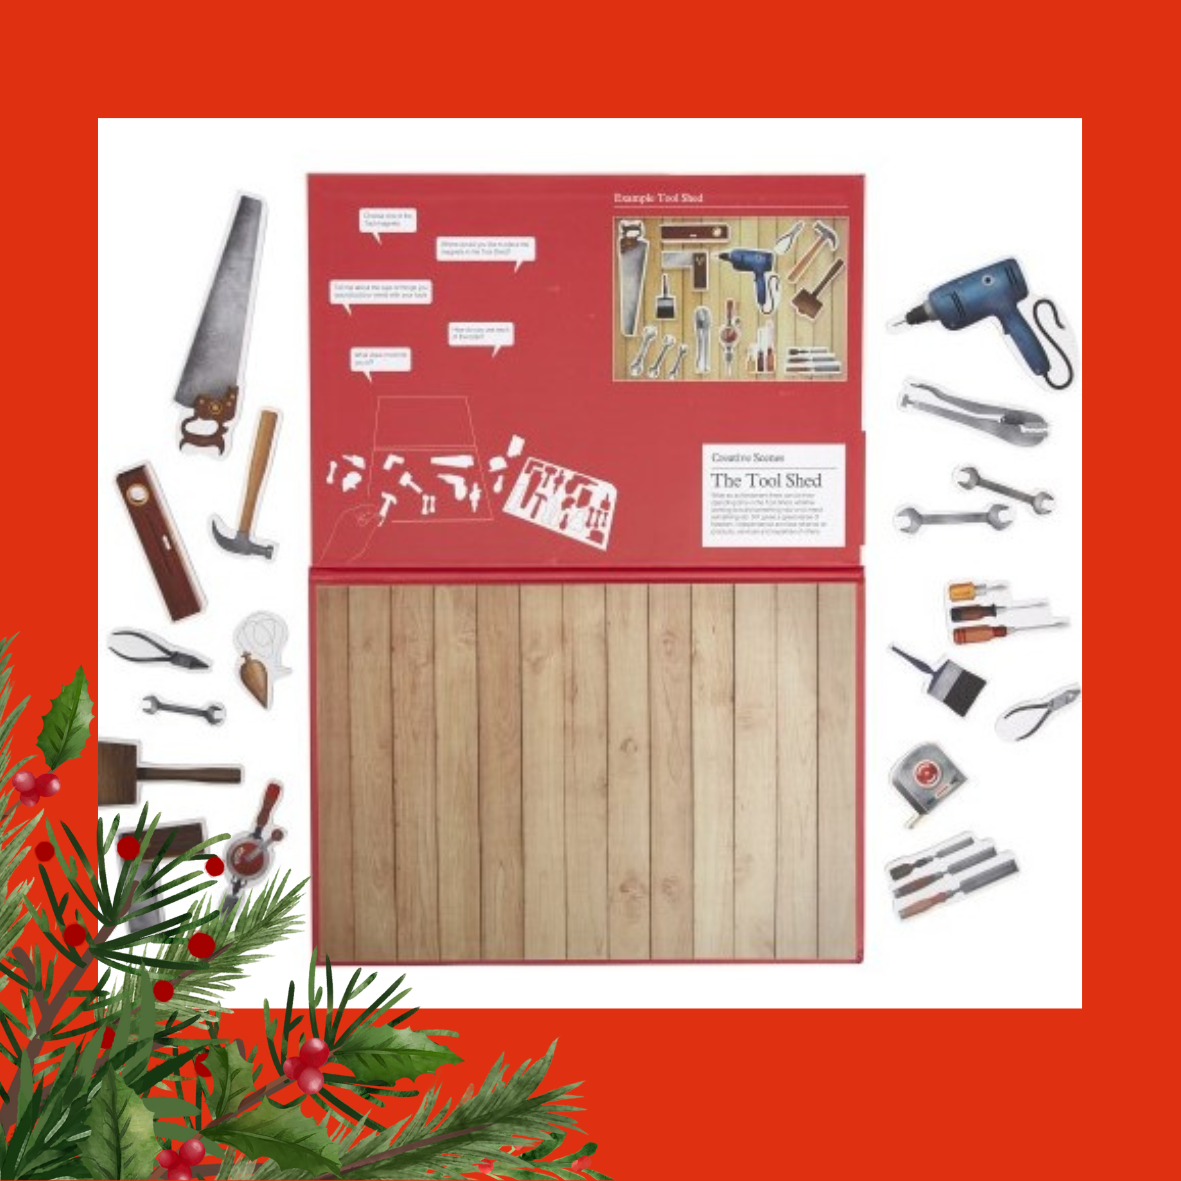 An image of the magnetic picture board, which is a tool shed theme. There are large magnetic images of tools around it which can be placed onto the board. The image is on a red background and there is holly and red berries in the left hand corner of the image. 